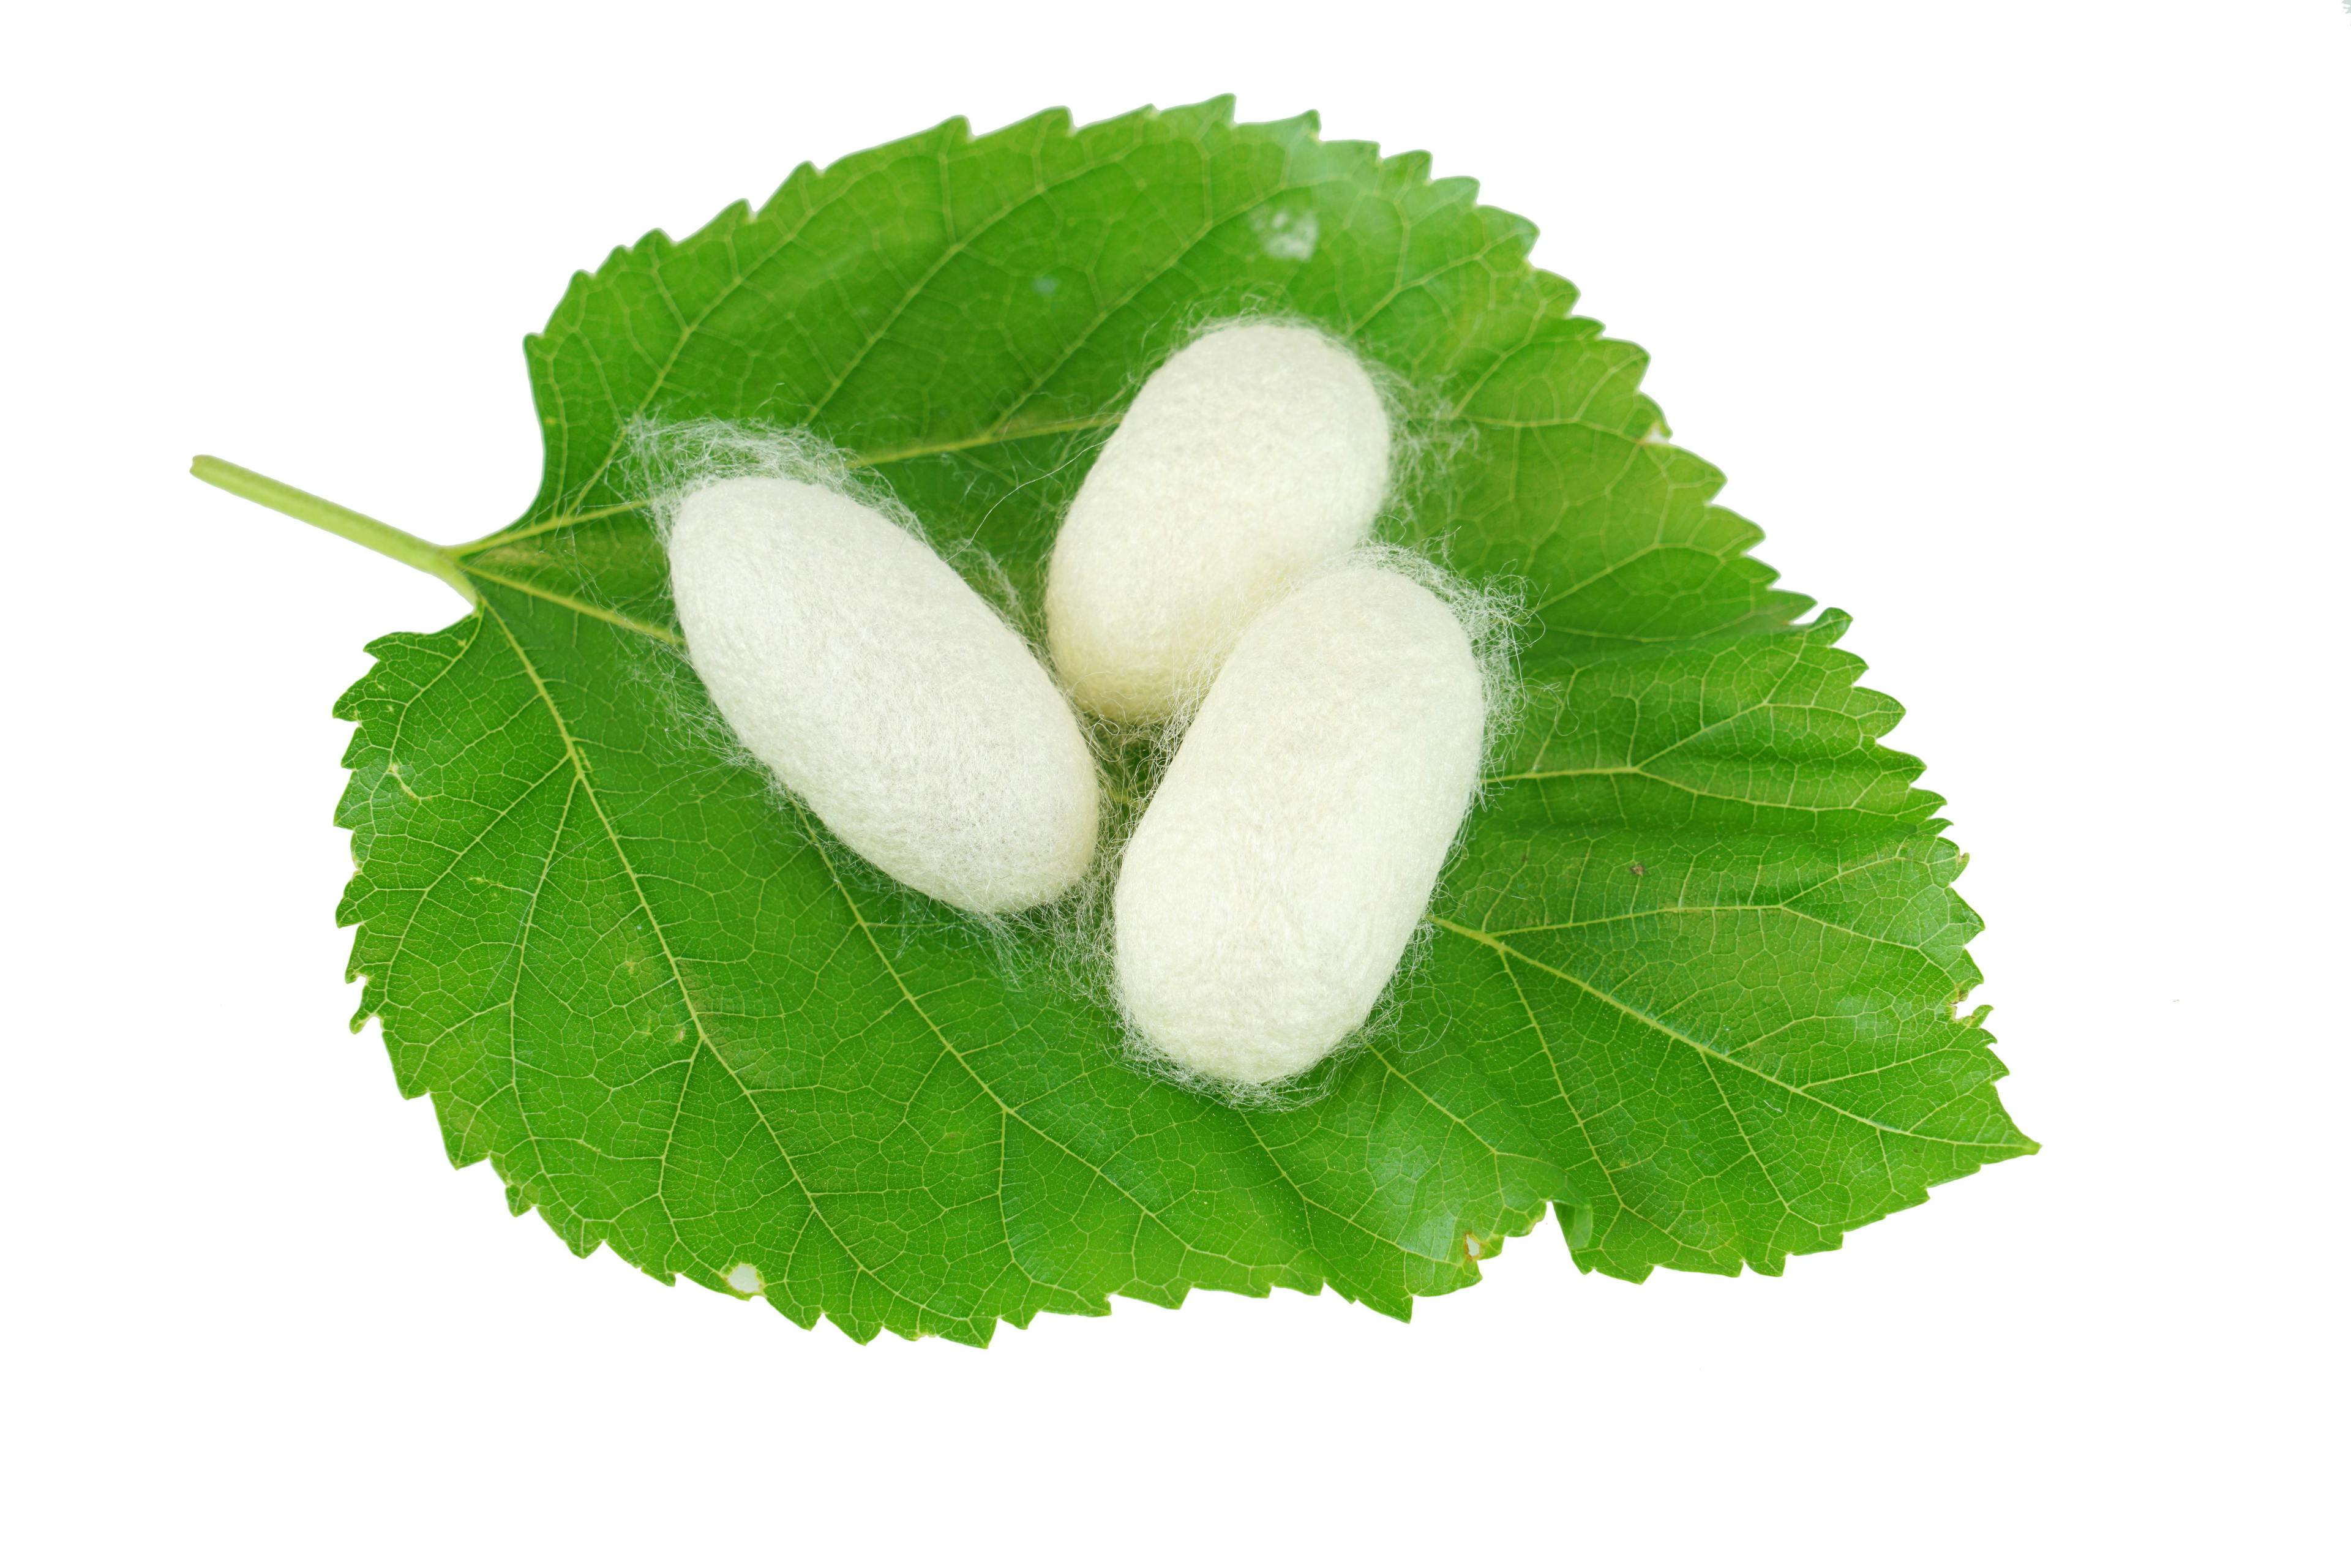 silkworm cocoon on green mulberry leaves | Image Credit: © nd700 - stock.adobe.com